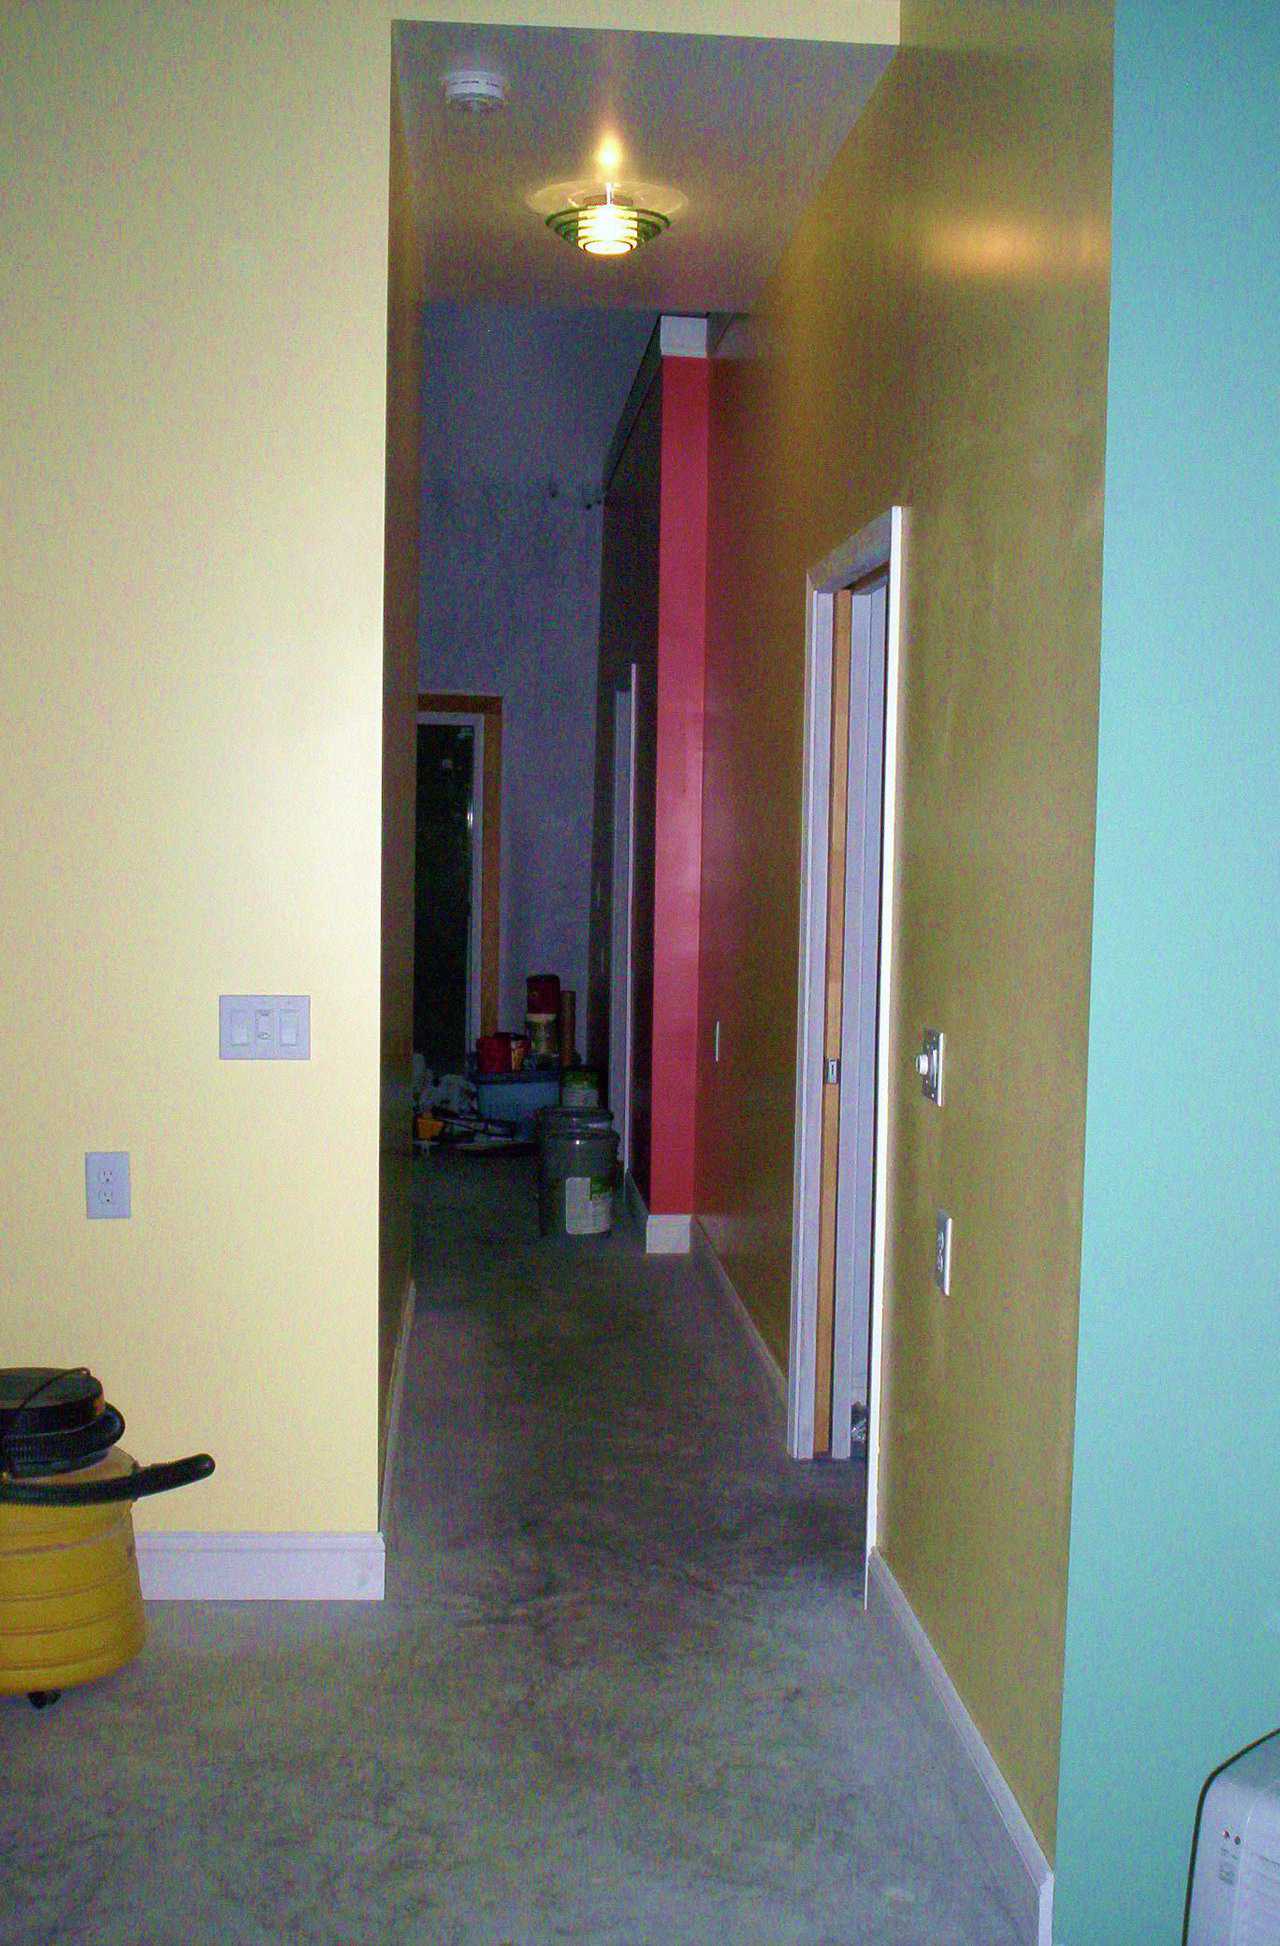 Wide Hallway — Bold colors break up spaces and identify corners and outcroppings.  A 36" wide hallway allows safe passage for persons with a cane, walker or wheelchair. (Ceilings are 9’ tall, which makes the hall width appear less than 36".)